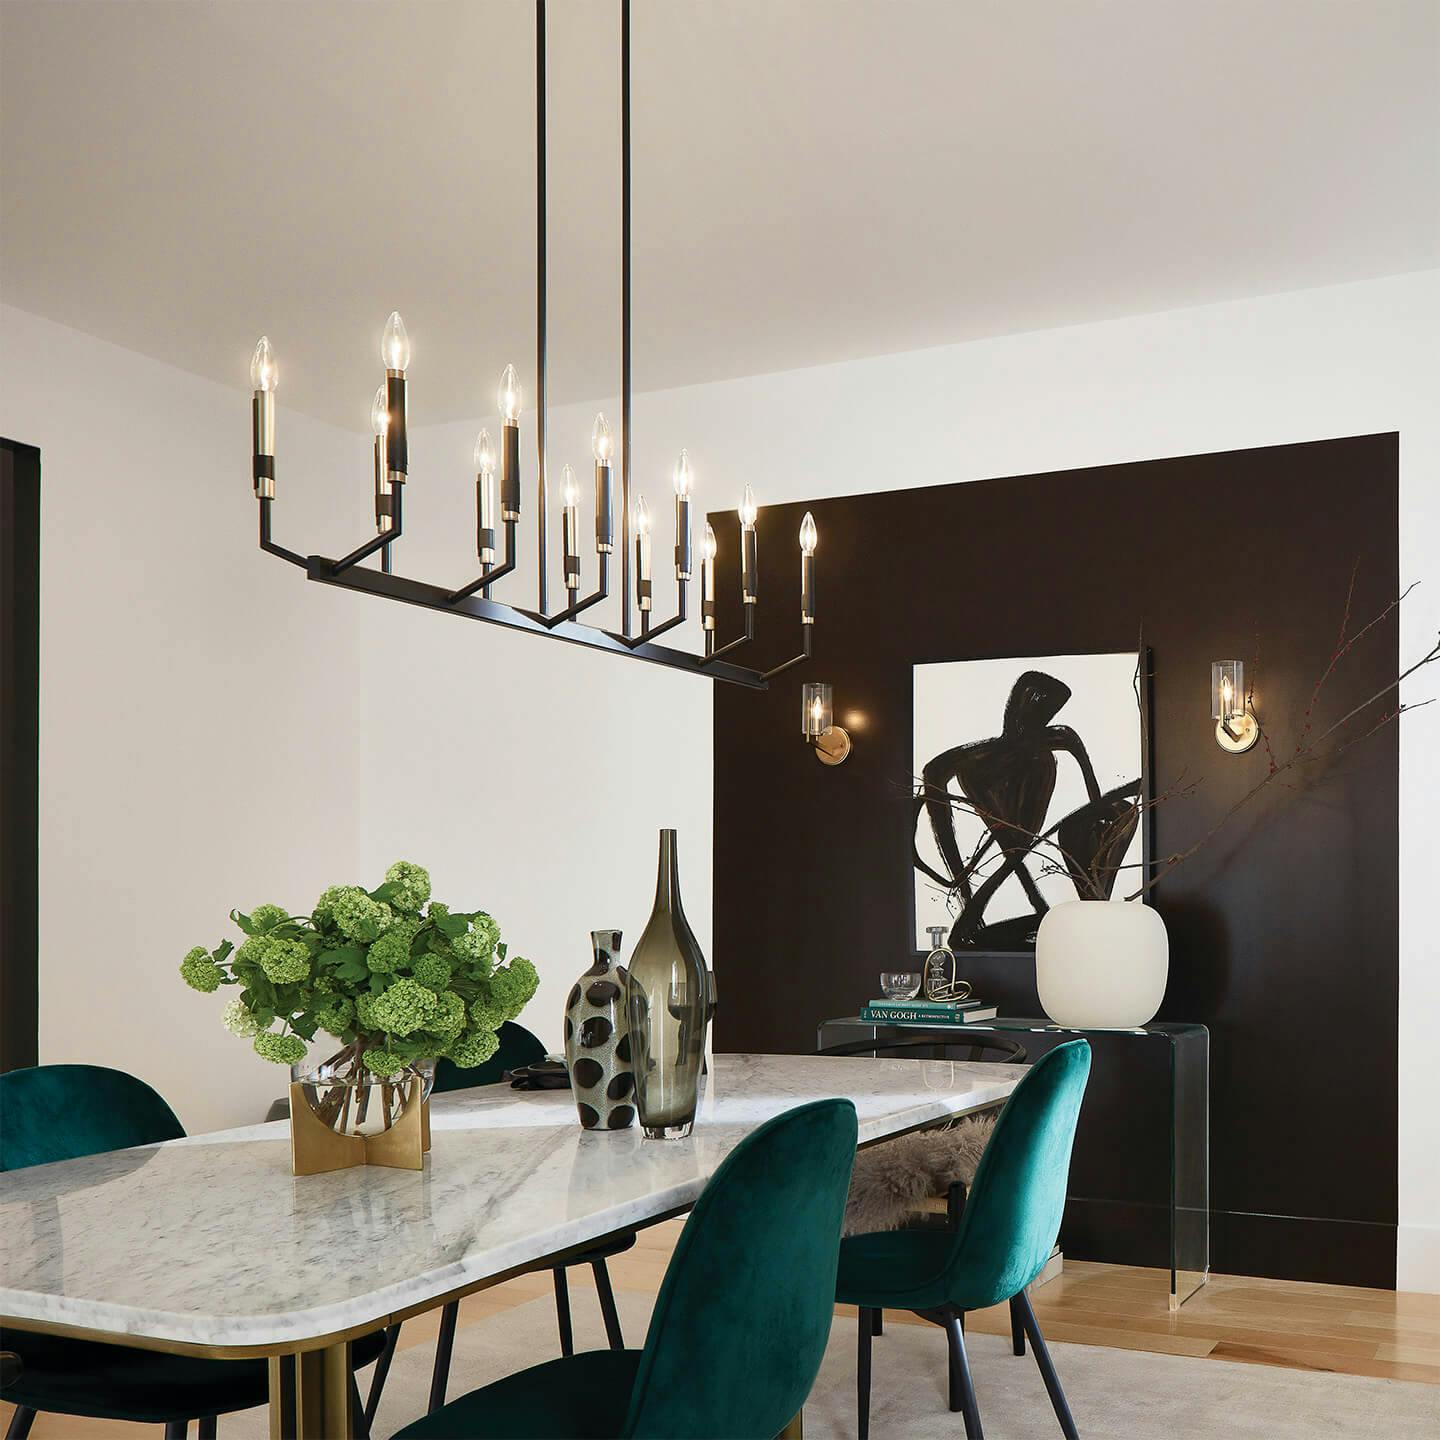 Dining room with Armand chandelier and vintage light bulbs